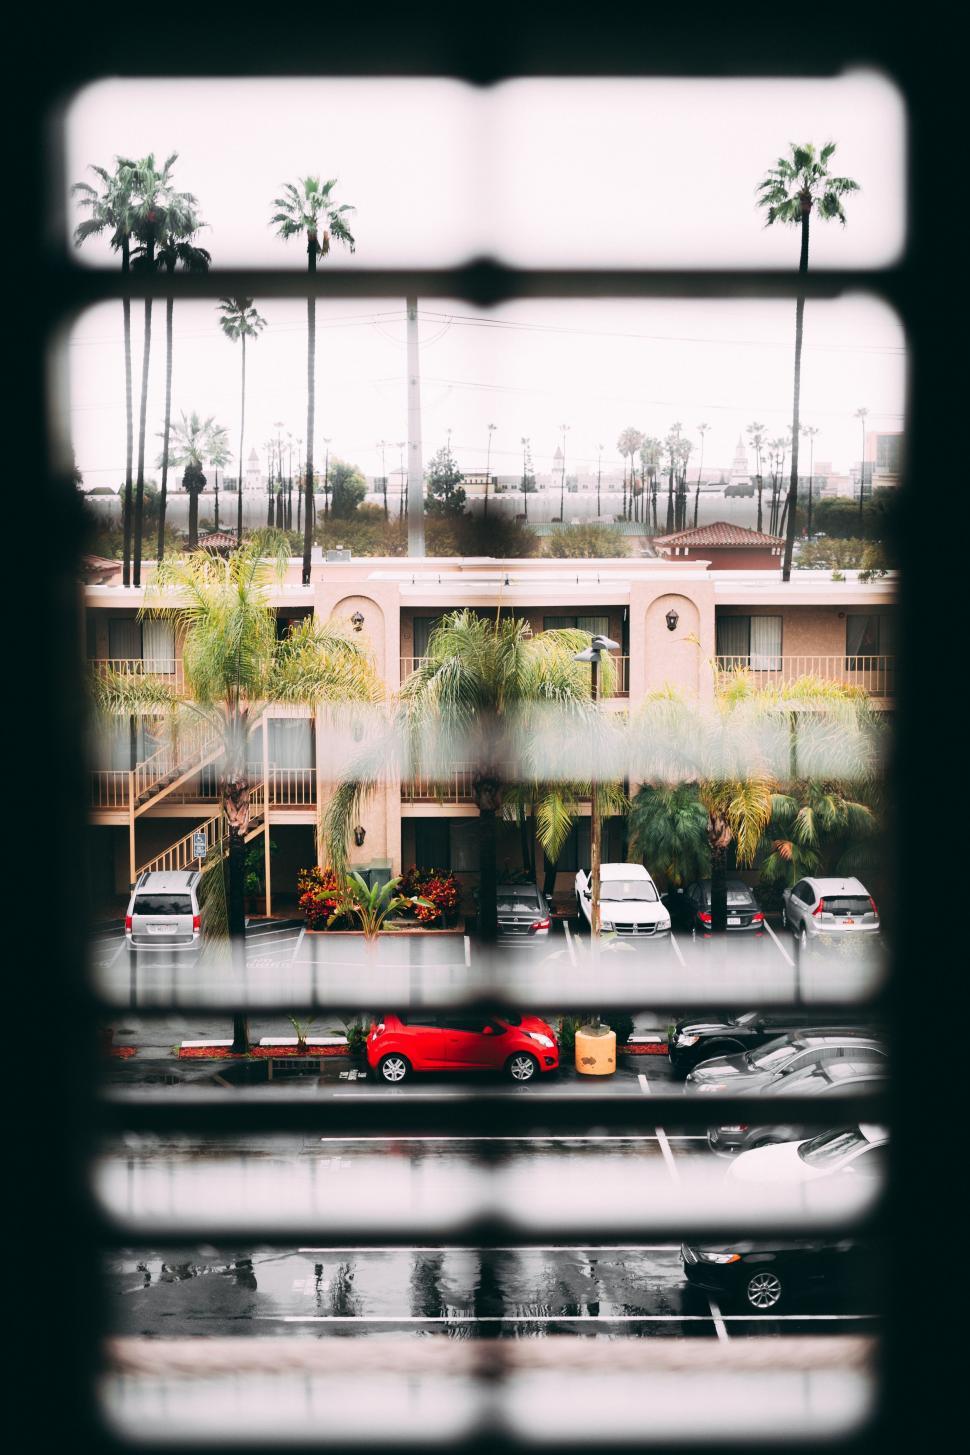 Free Image of View of a Parking Lot Through a Window 